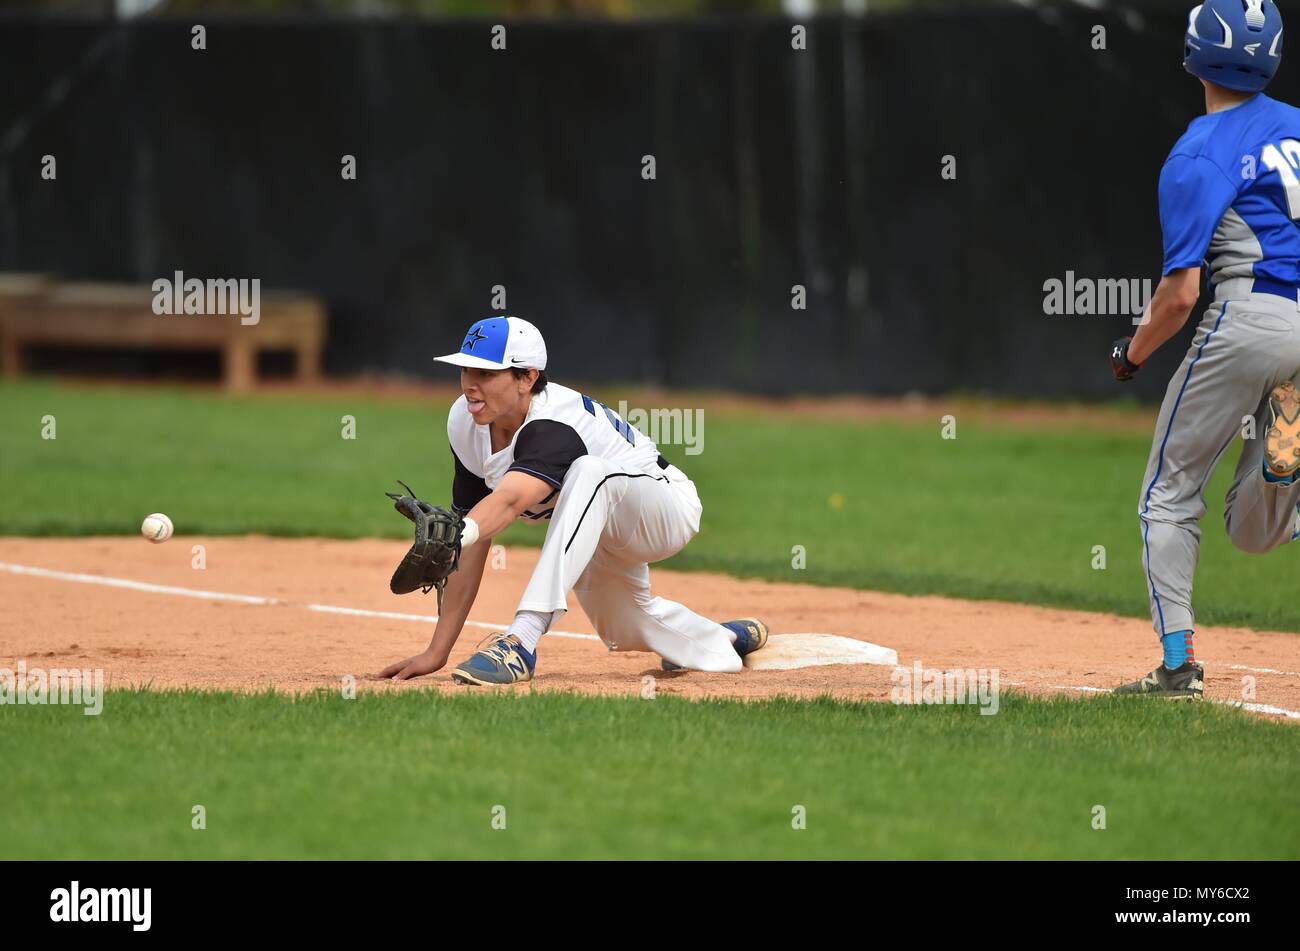 First baseman stretching to secure a throw from shortstop to retire an opposing hitter. USA. Stock Photo